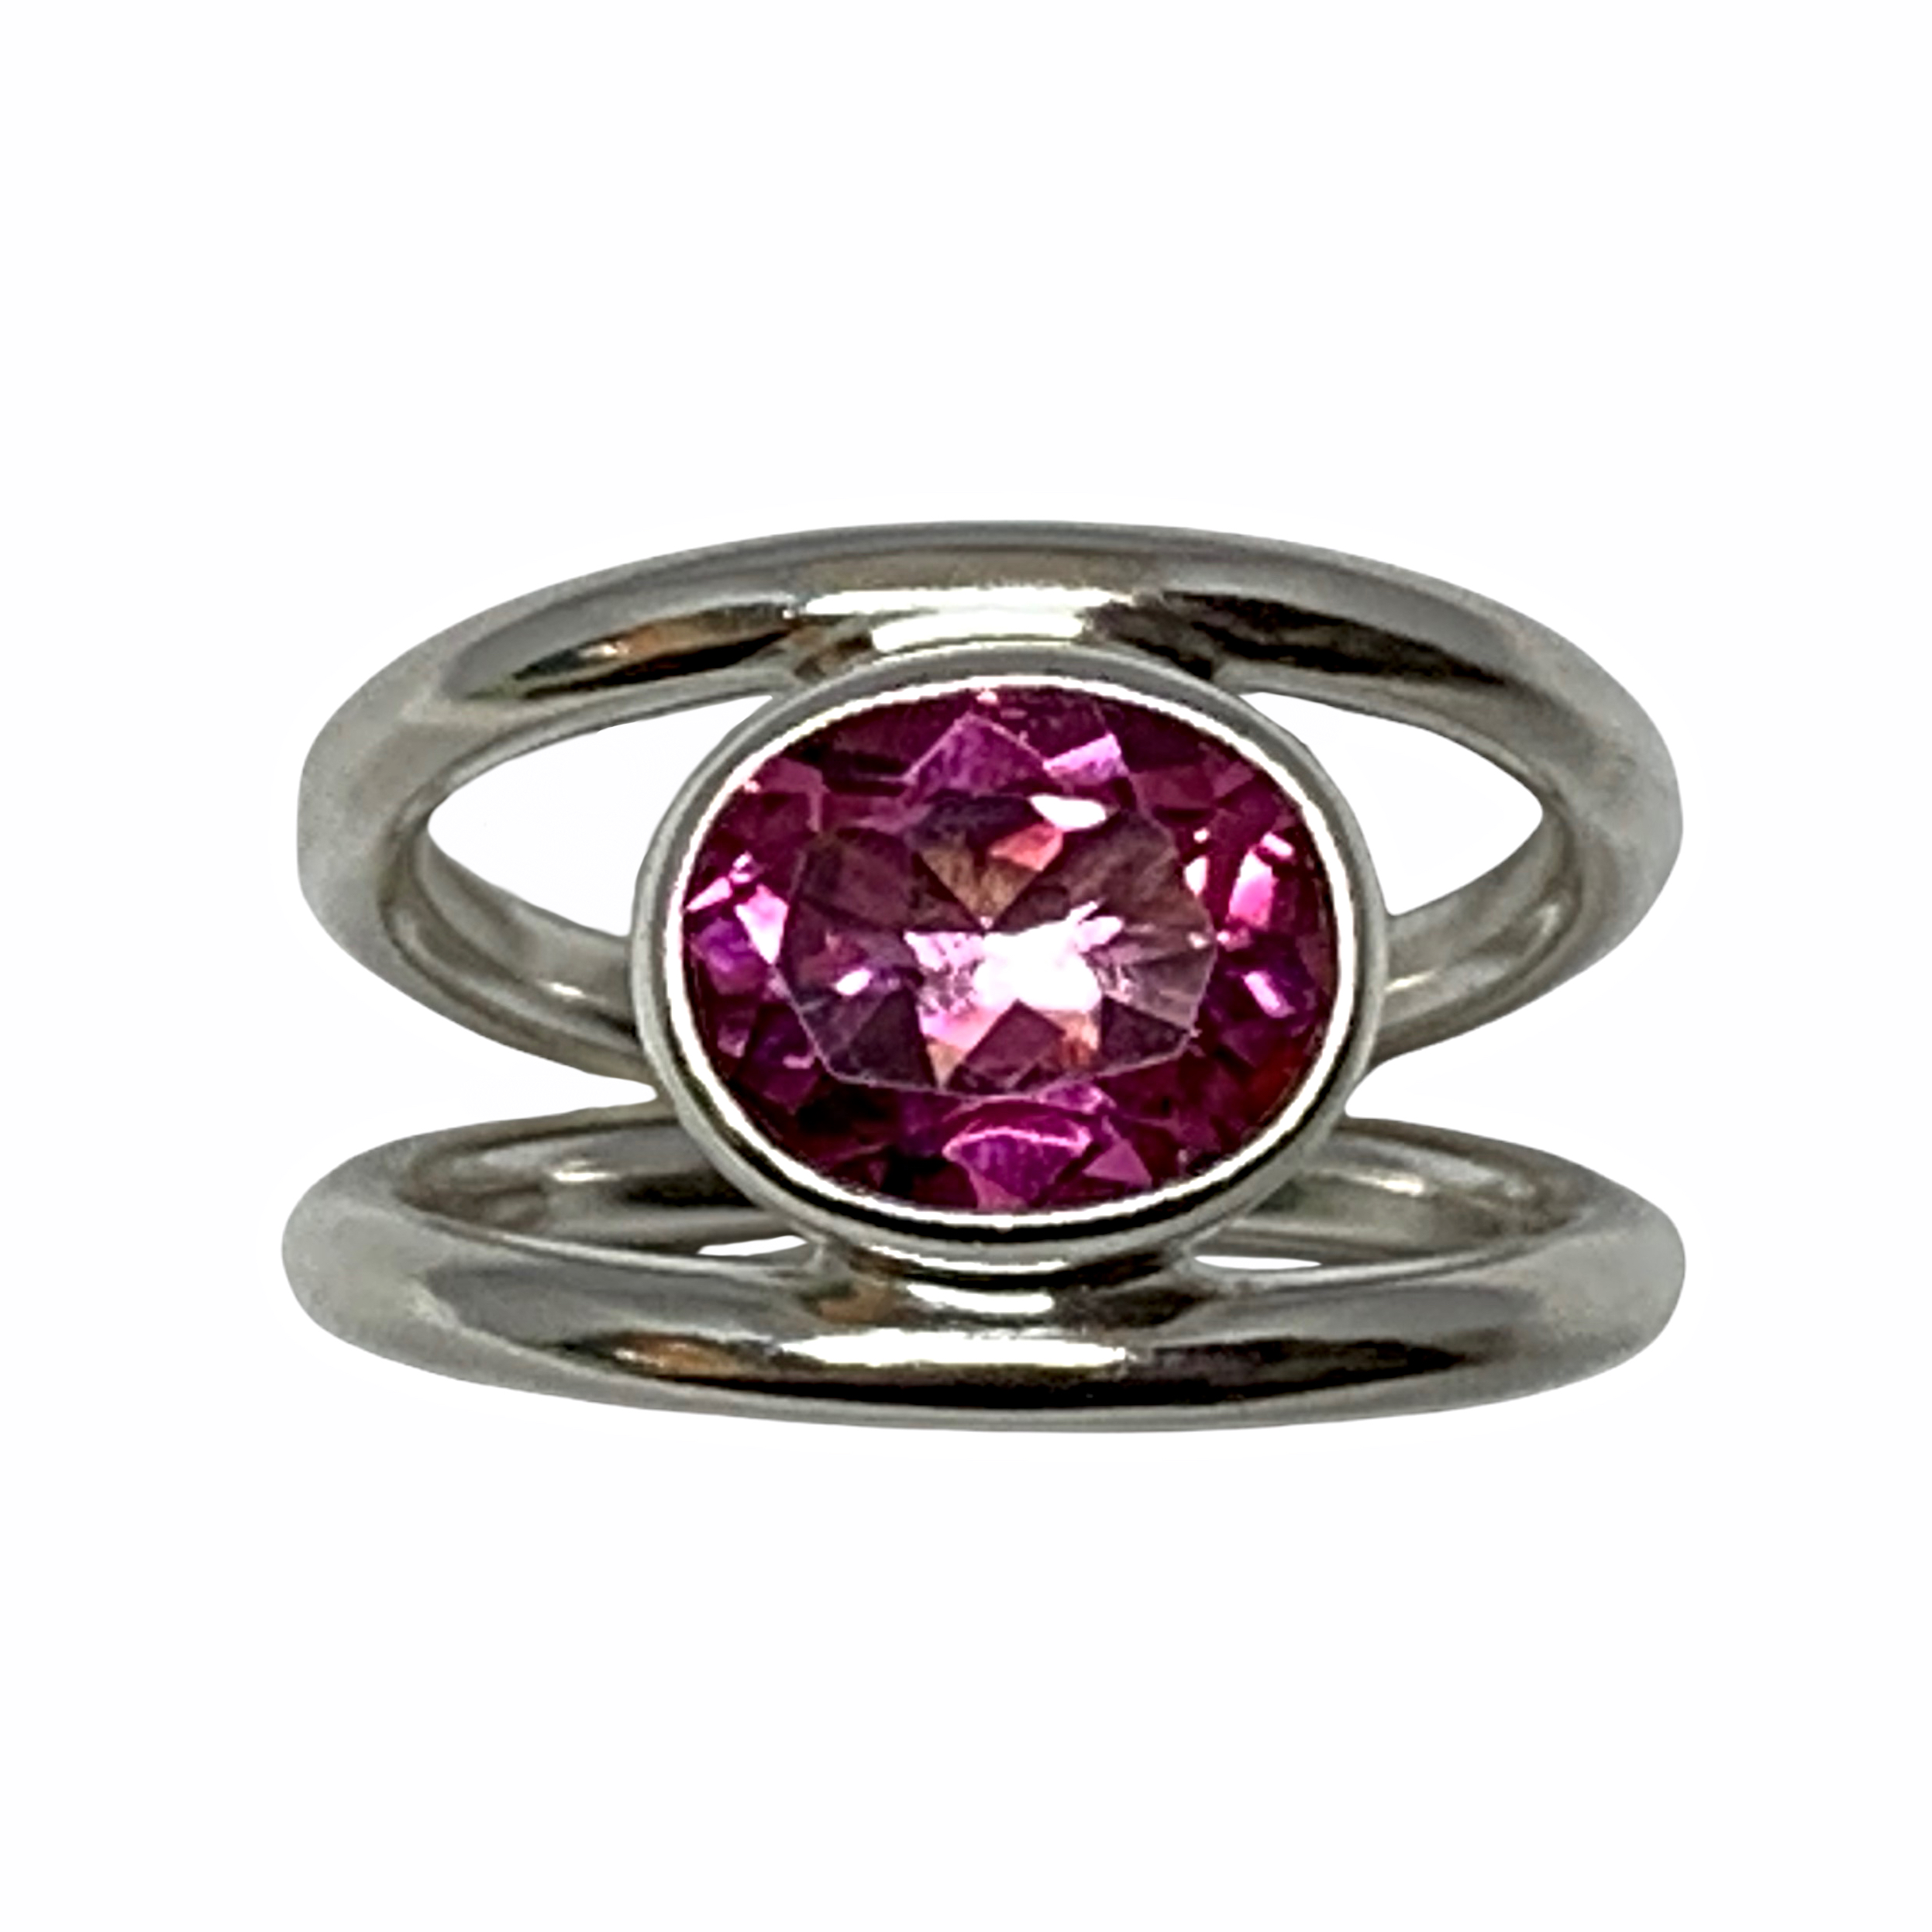 Handmade sterling silver and pink topaz ring by A&R Jewellery | Effusion Art Gallery + Cast Glass Studio, Invermere BC